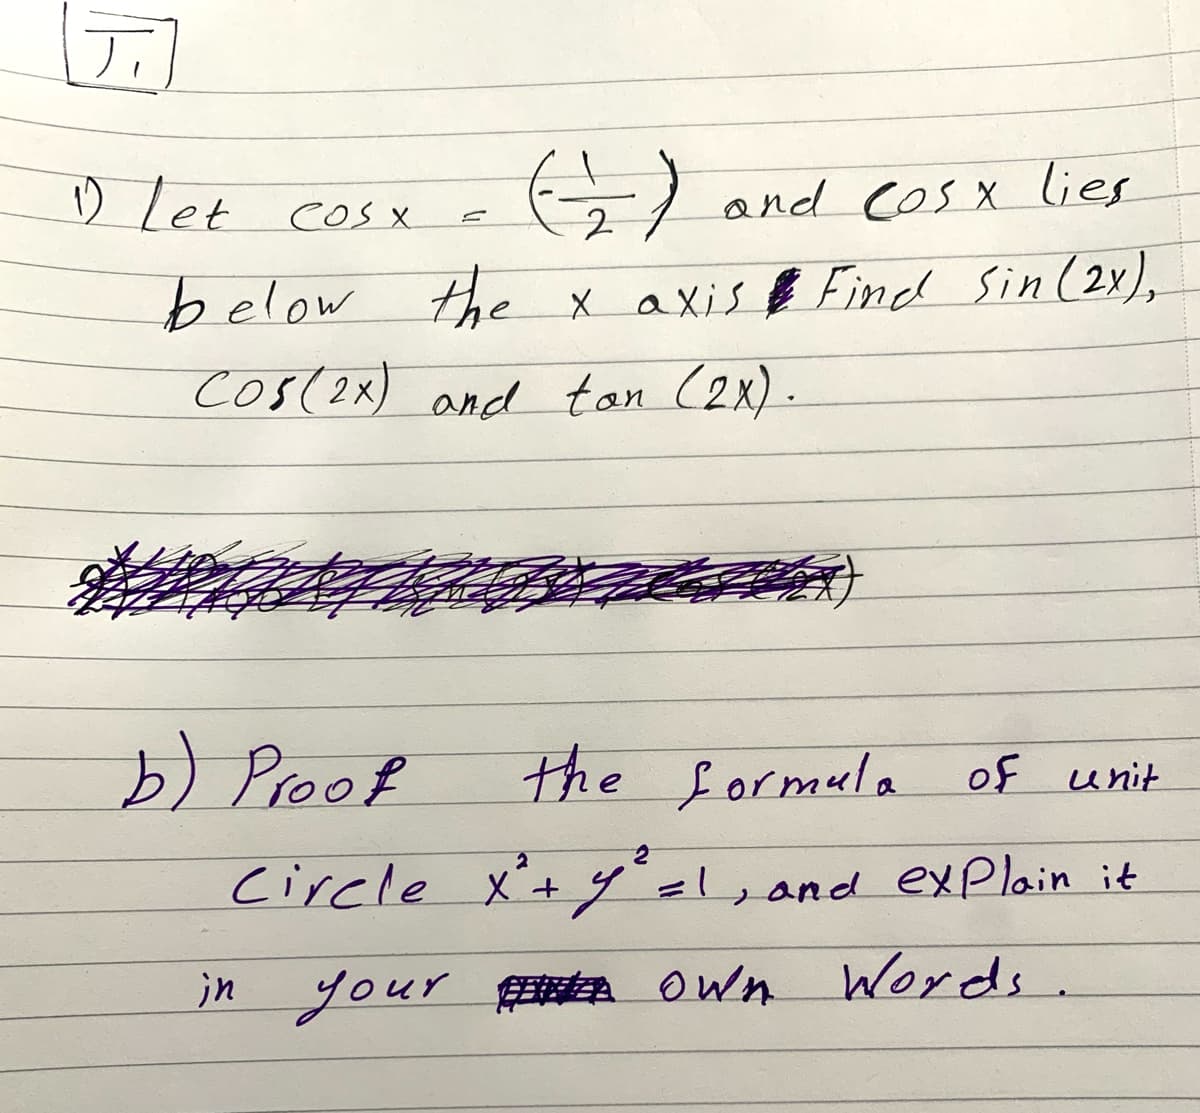 Dlet cos x
GL and Cos x lies
below the X axis e Find Sin (2x),
cos(2x) and tan (2x).
) Proof
the Lormula of unit
circle
X+y=1,and exPlain it
in your EA OWn Words.
